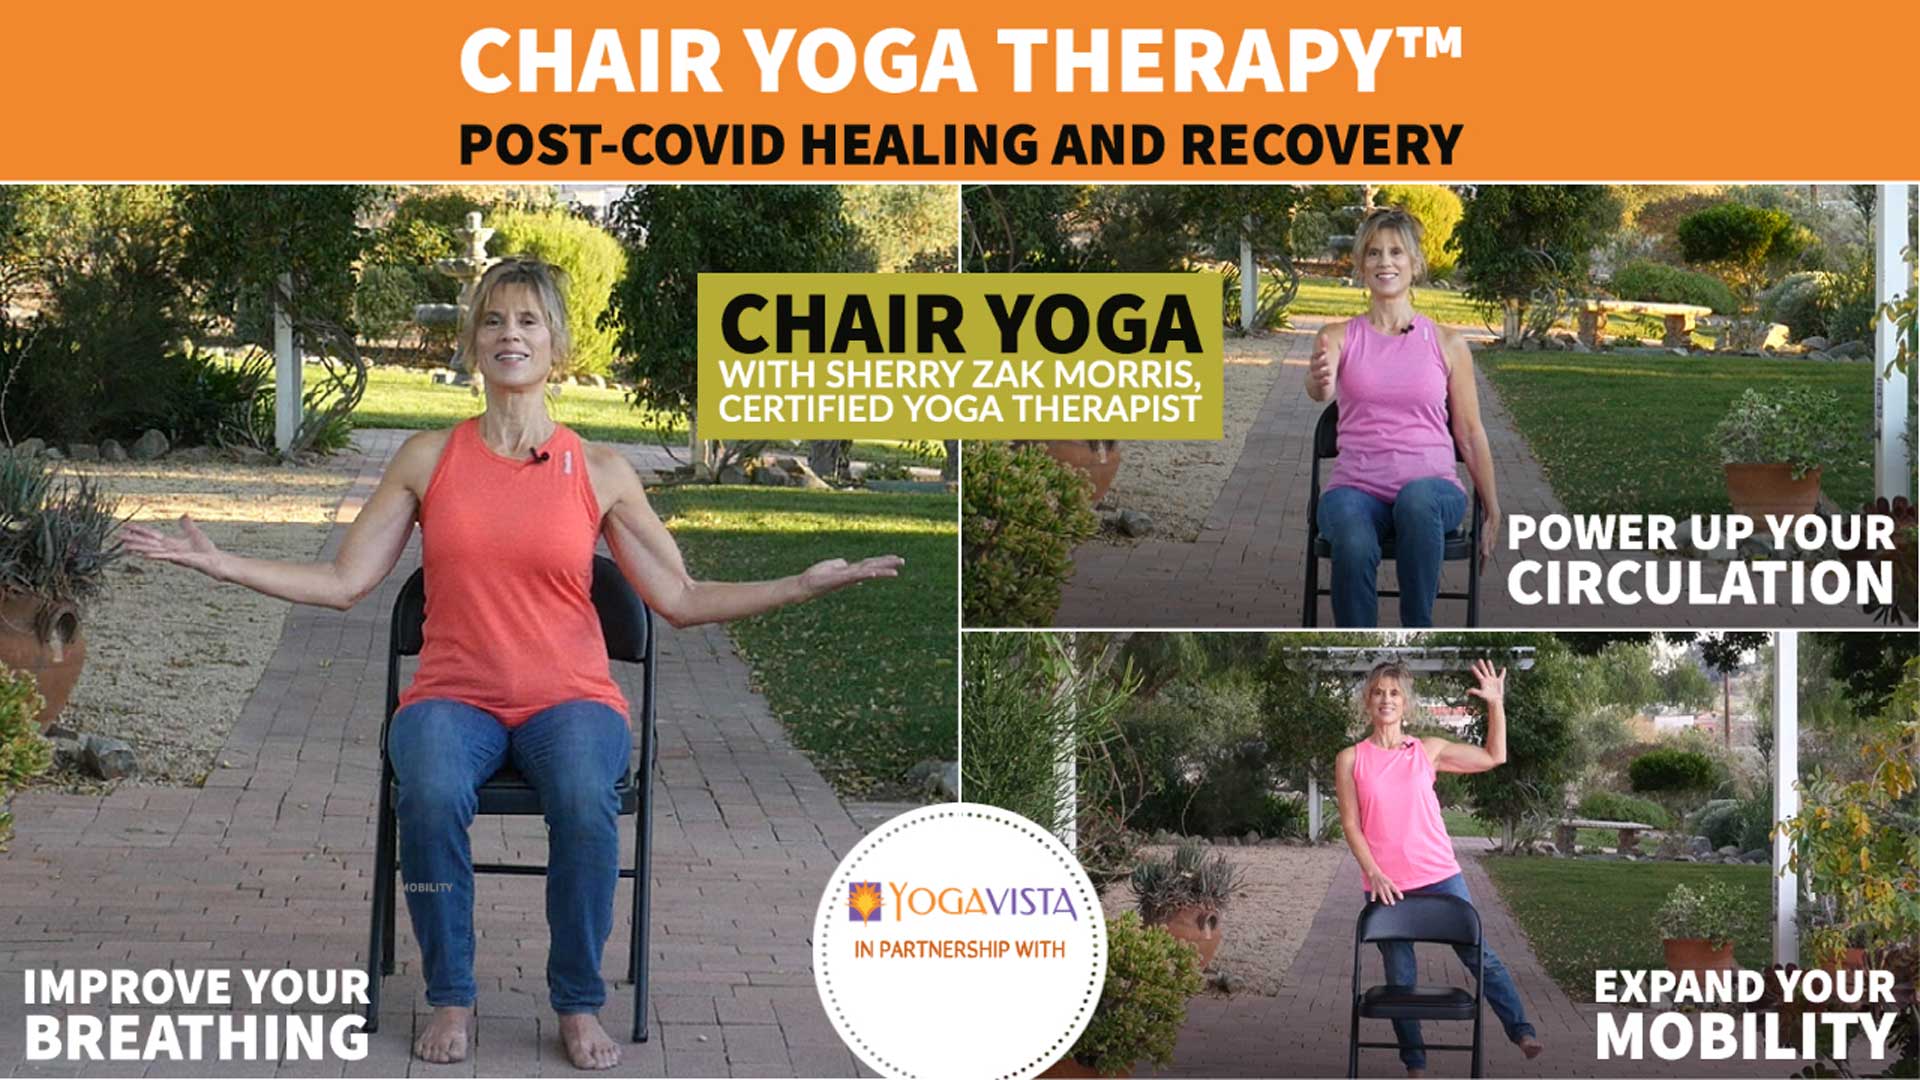 Sherry Zak Morris Chair Yoga Therapy Post-Covid Healing & Recovery